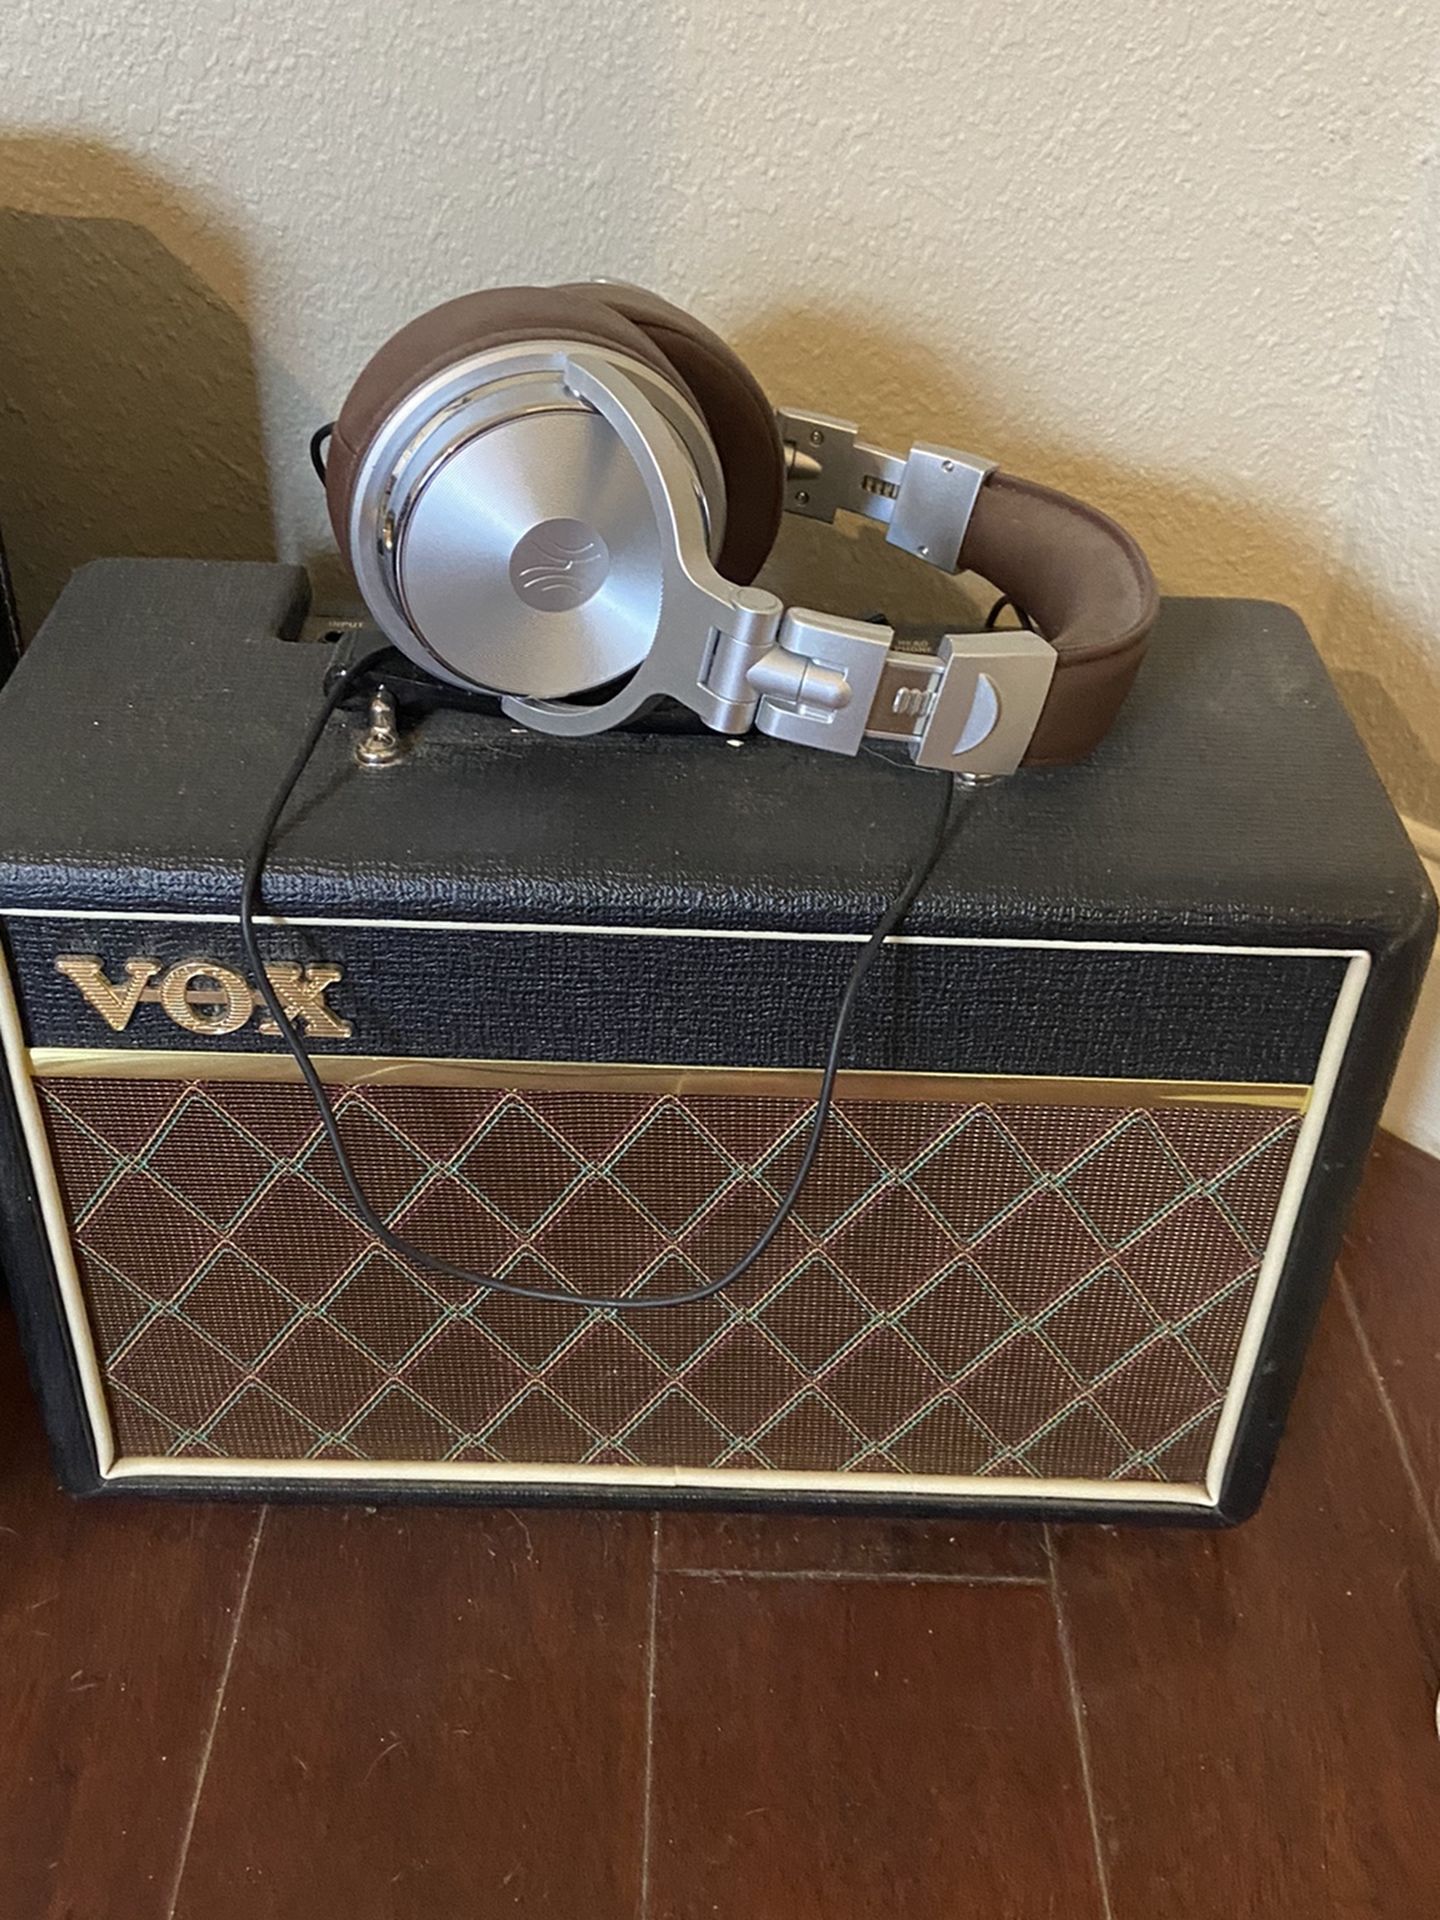 Vox Pathfinder 10 With Stereo Headset